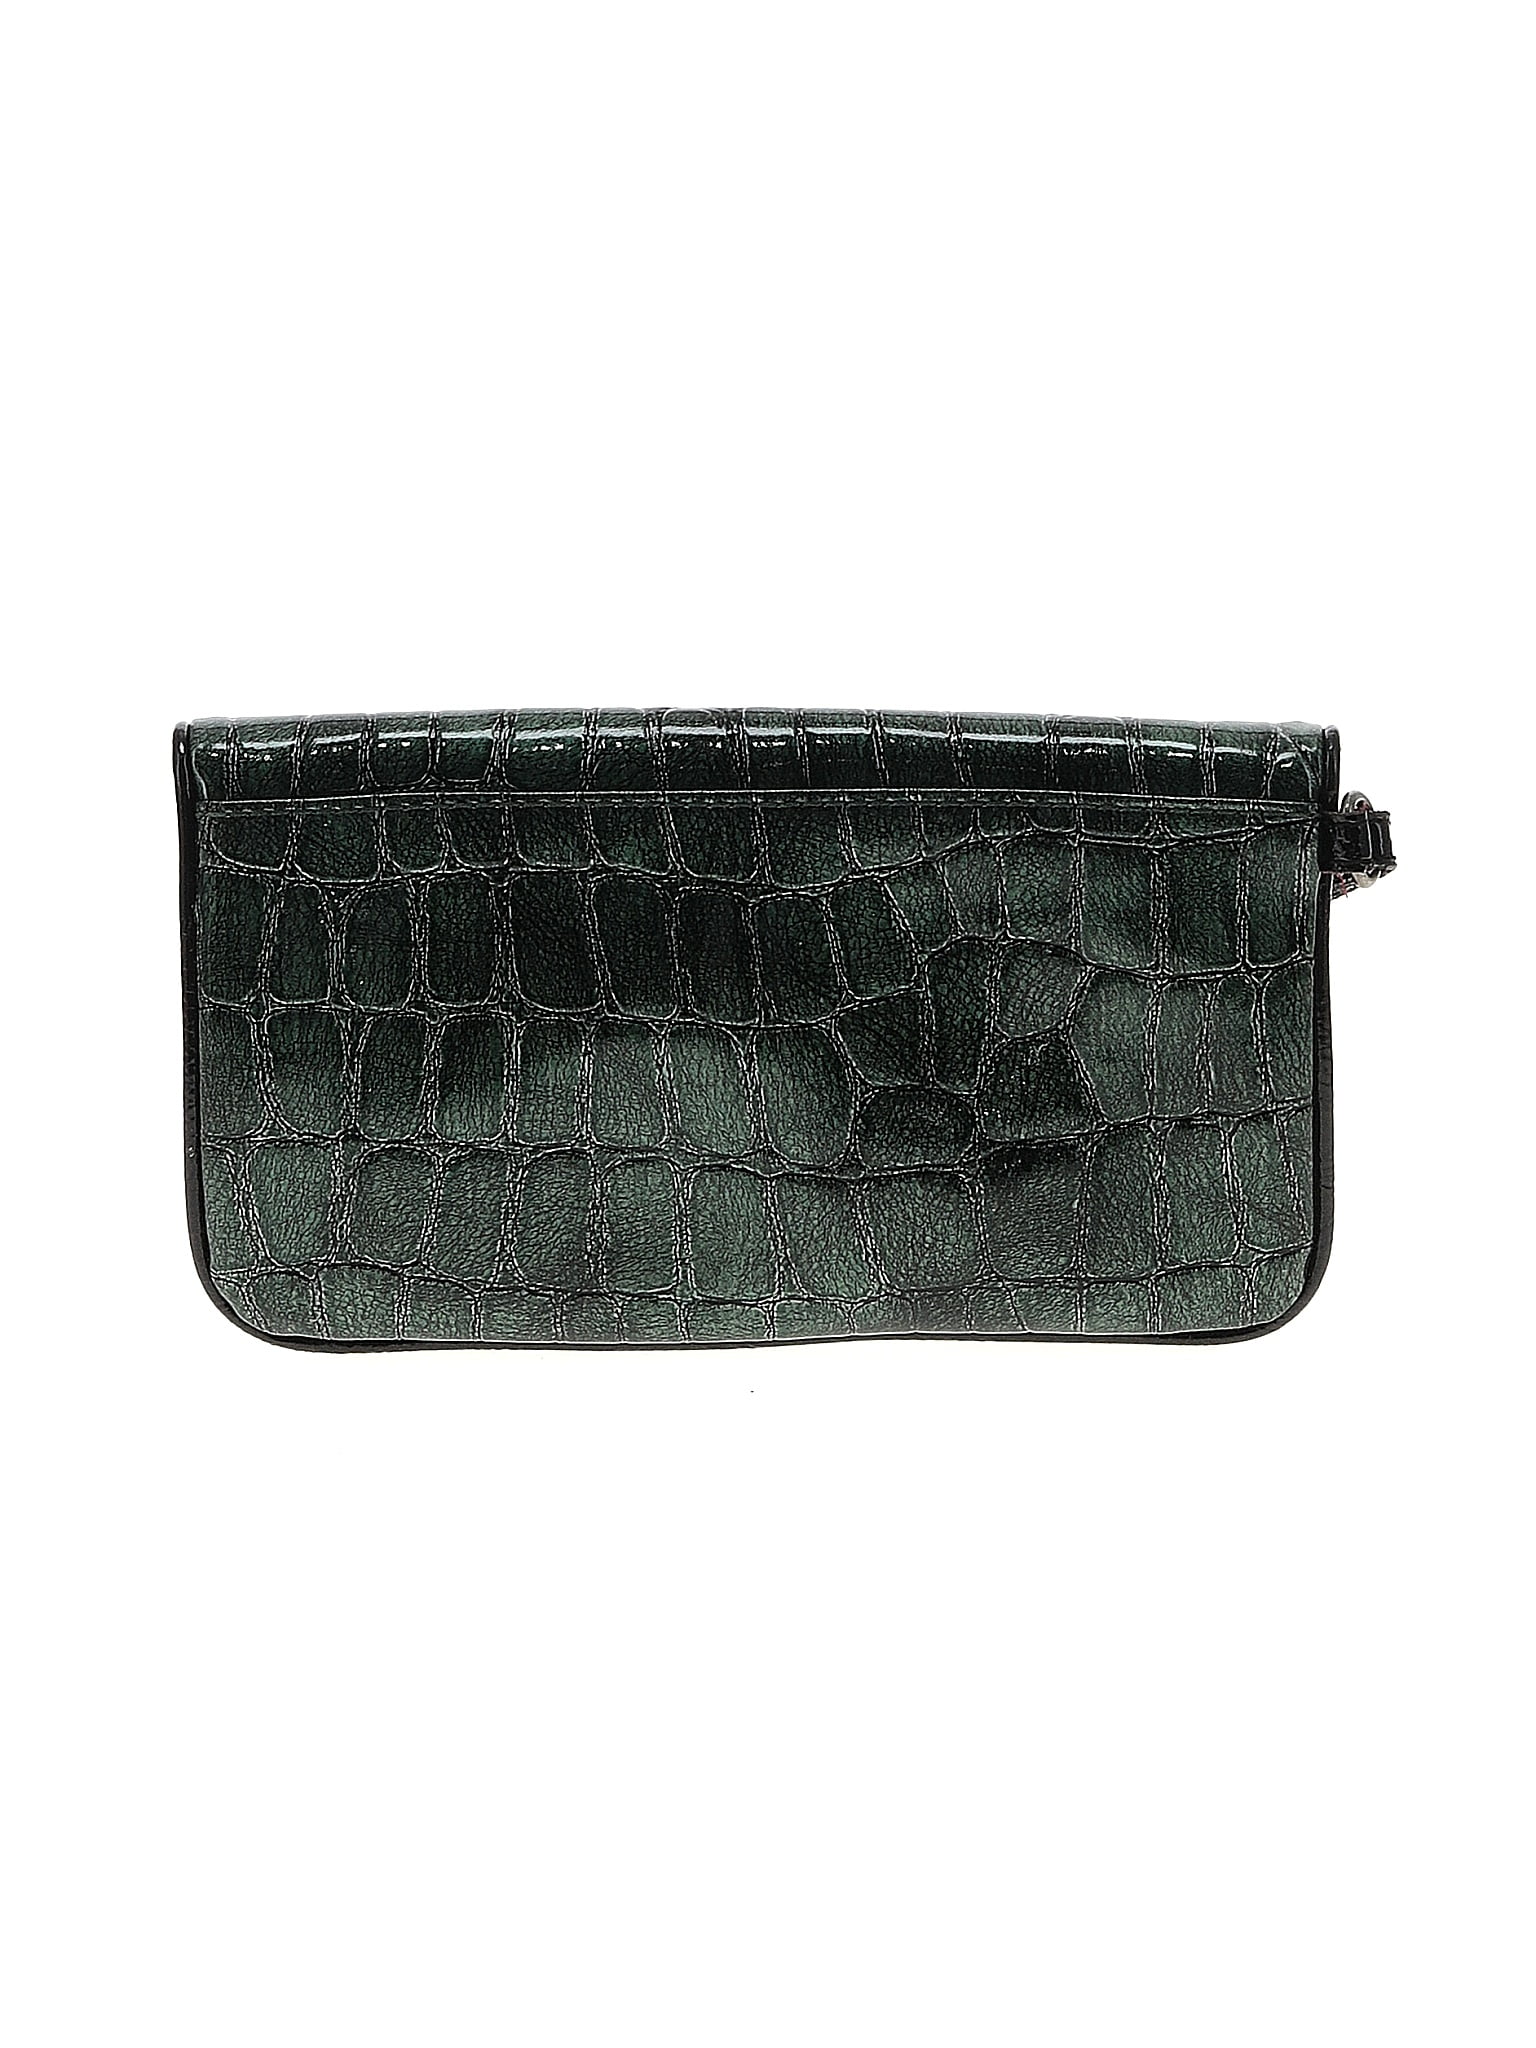 Simply Vera Vera Wang Solid Black Wallet One Size - 52% off